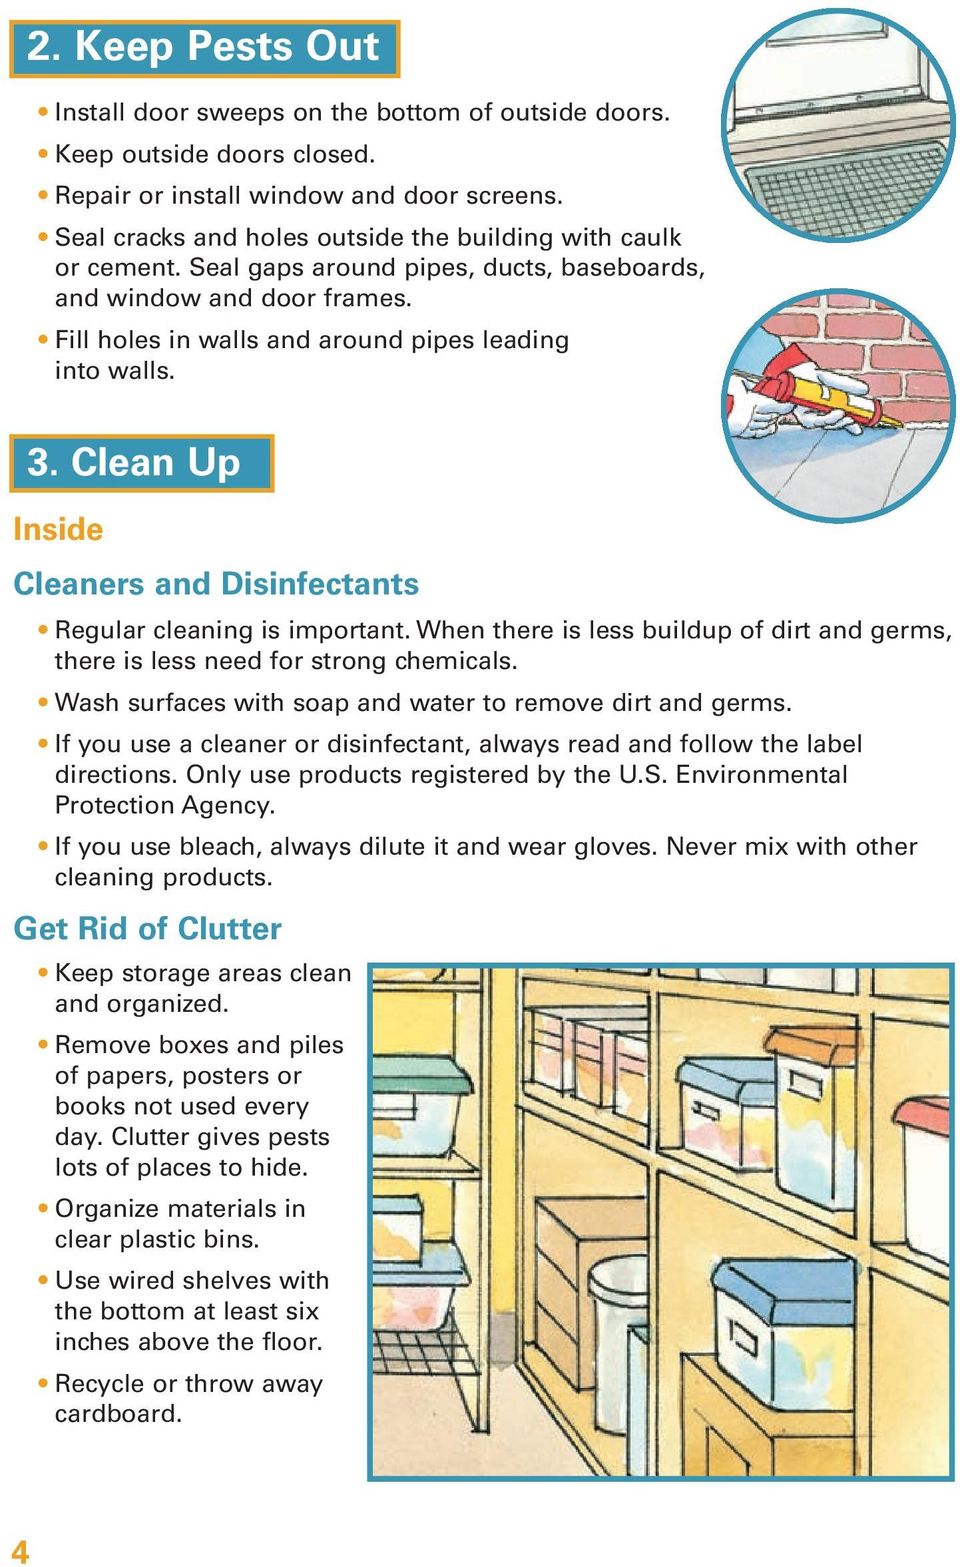 Clean Up Inside Cleaners and Disinfectants Regular cleaning is important. When there is less buildup of dirt and germs, there is less need for strong chemicals.